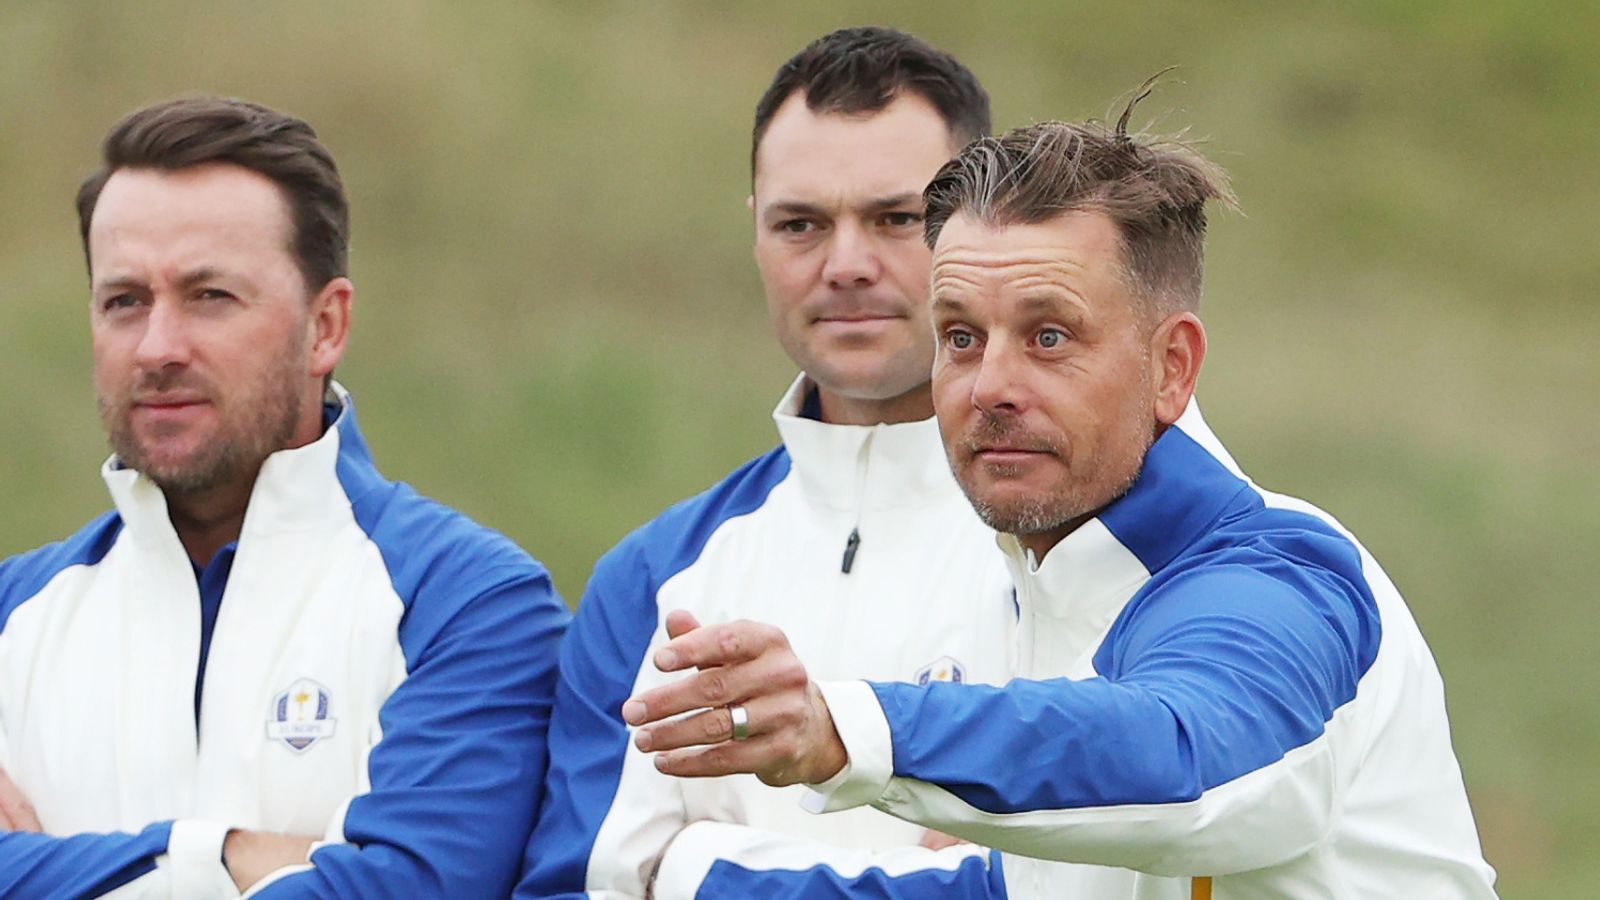 How will Ryder Cup be impacted after Henrik Stenson ‘let DP World Tour down’ by joining LIV Golf?